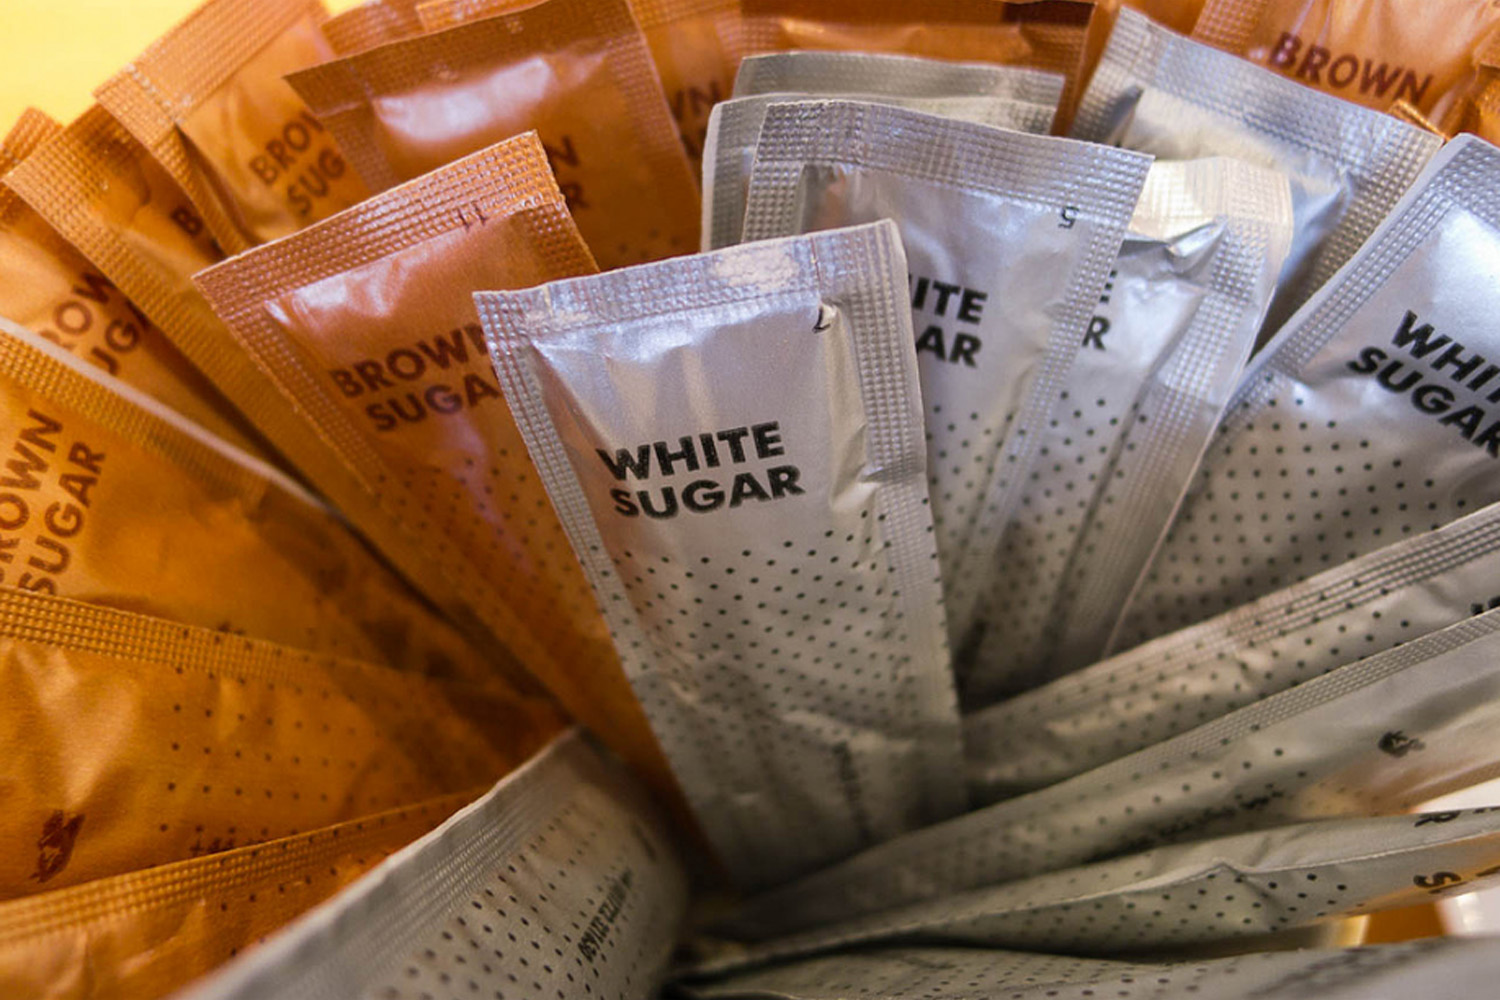 A collection of brown and white sugar packets. (James Brooks/Flickr)